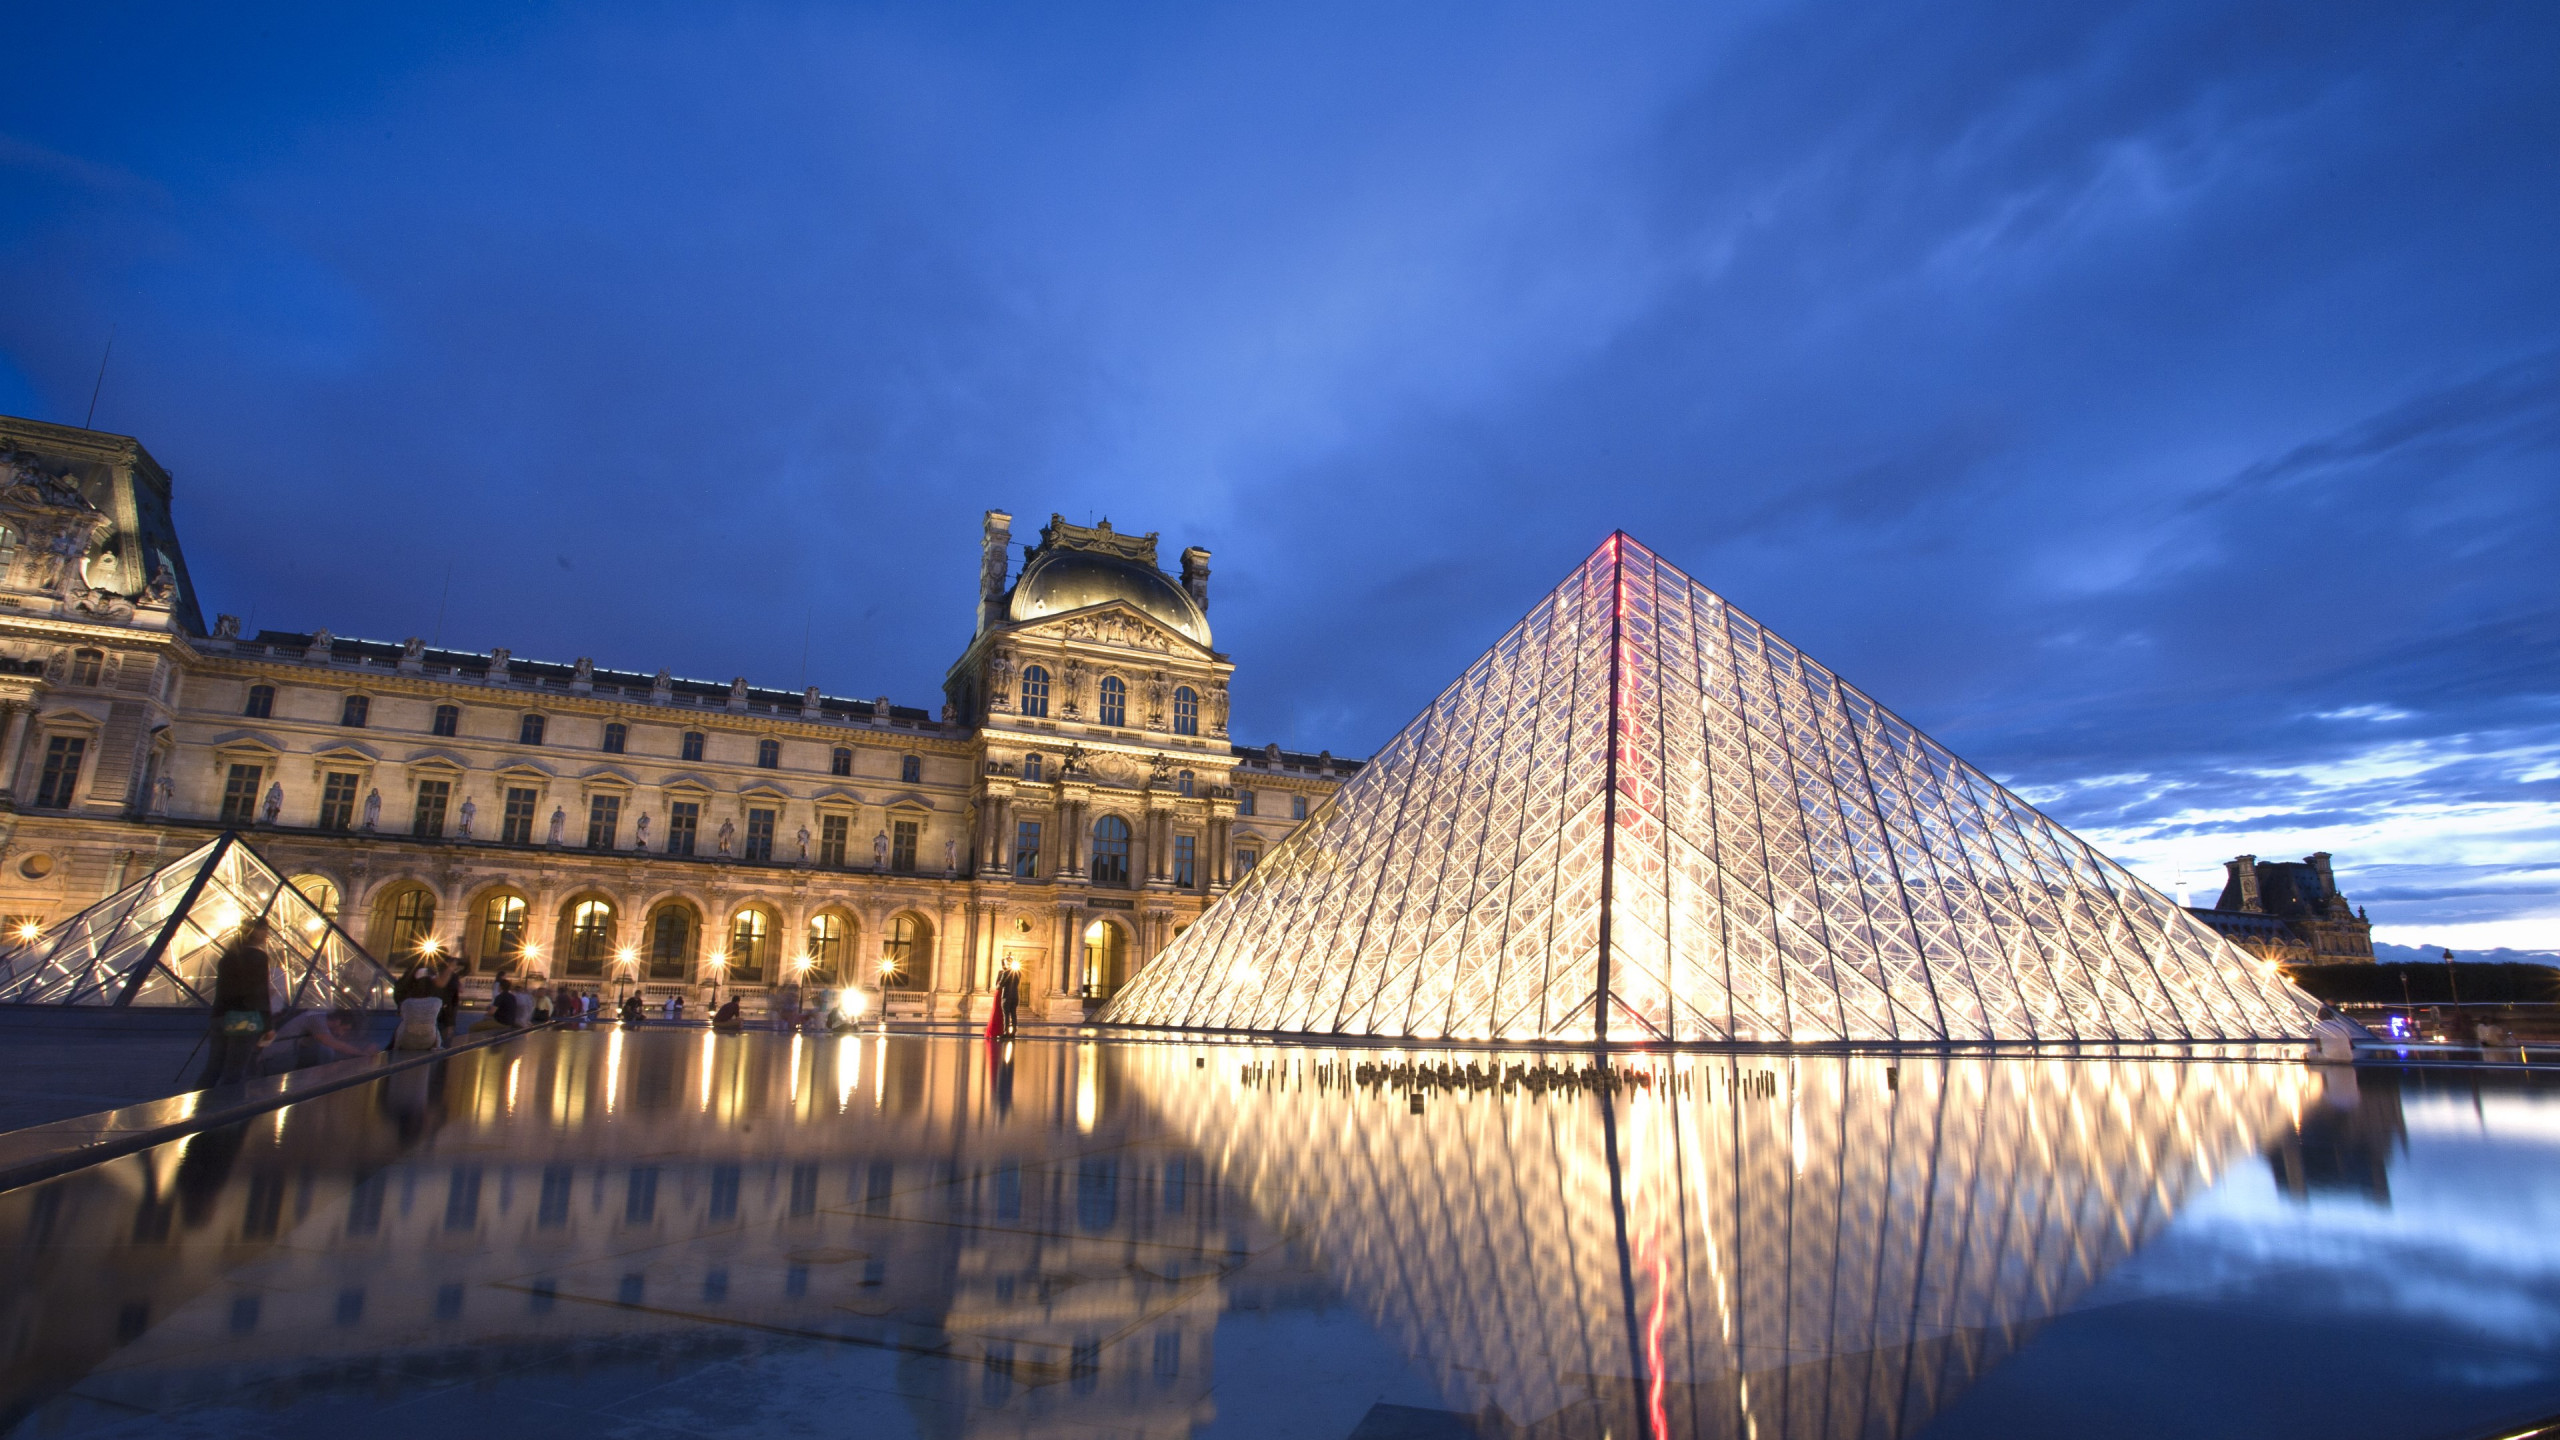 Louvre pyramid and museum wallpaper 2560x1440